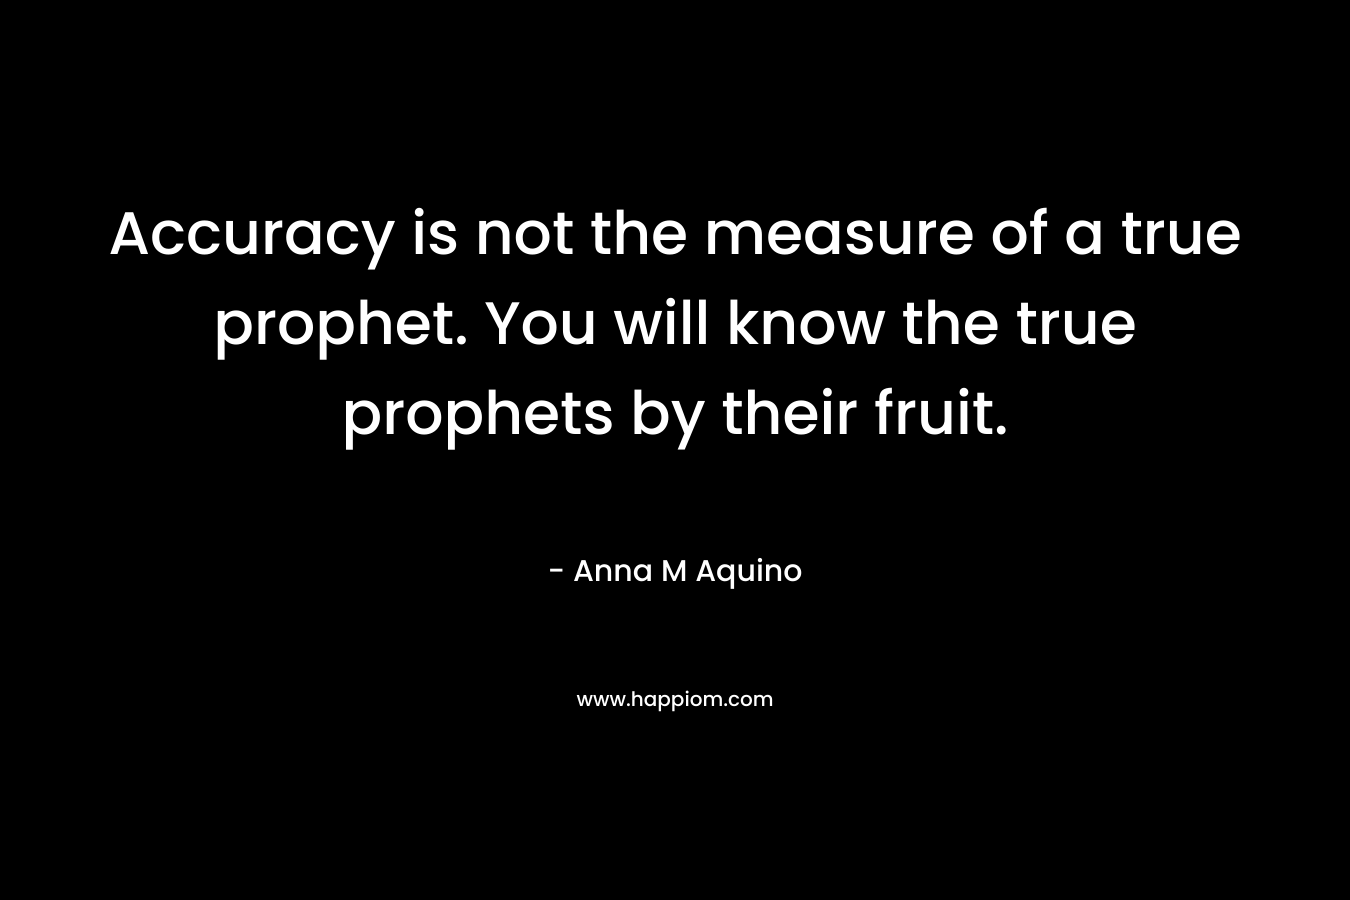 Accuracy is not the measure of a true prophet. You will know the true prophets by their fruit. – Anna M Aquino